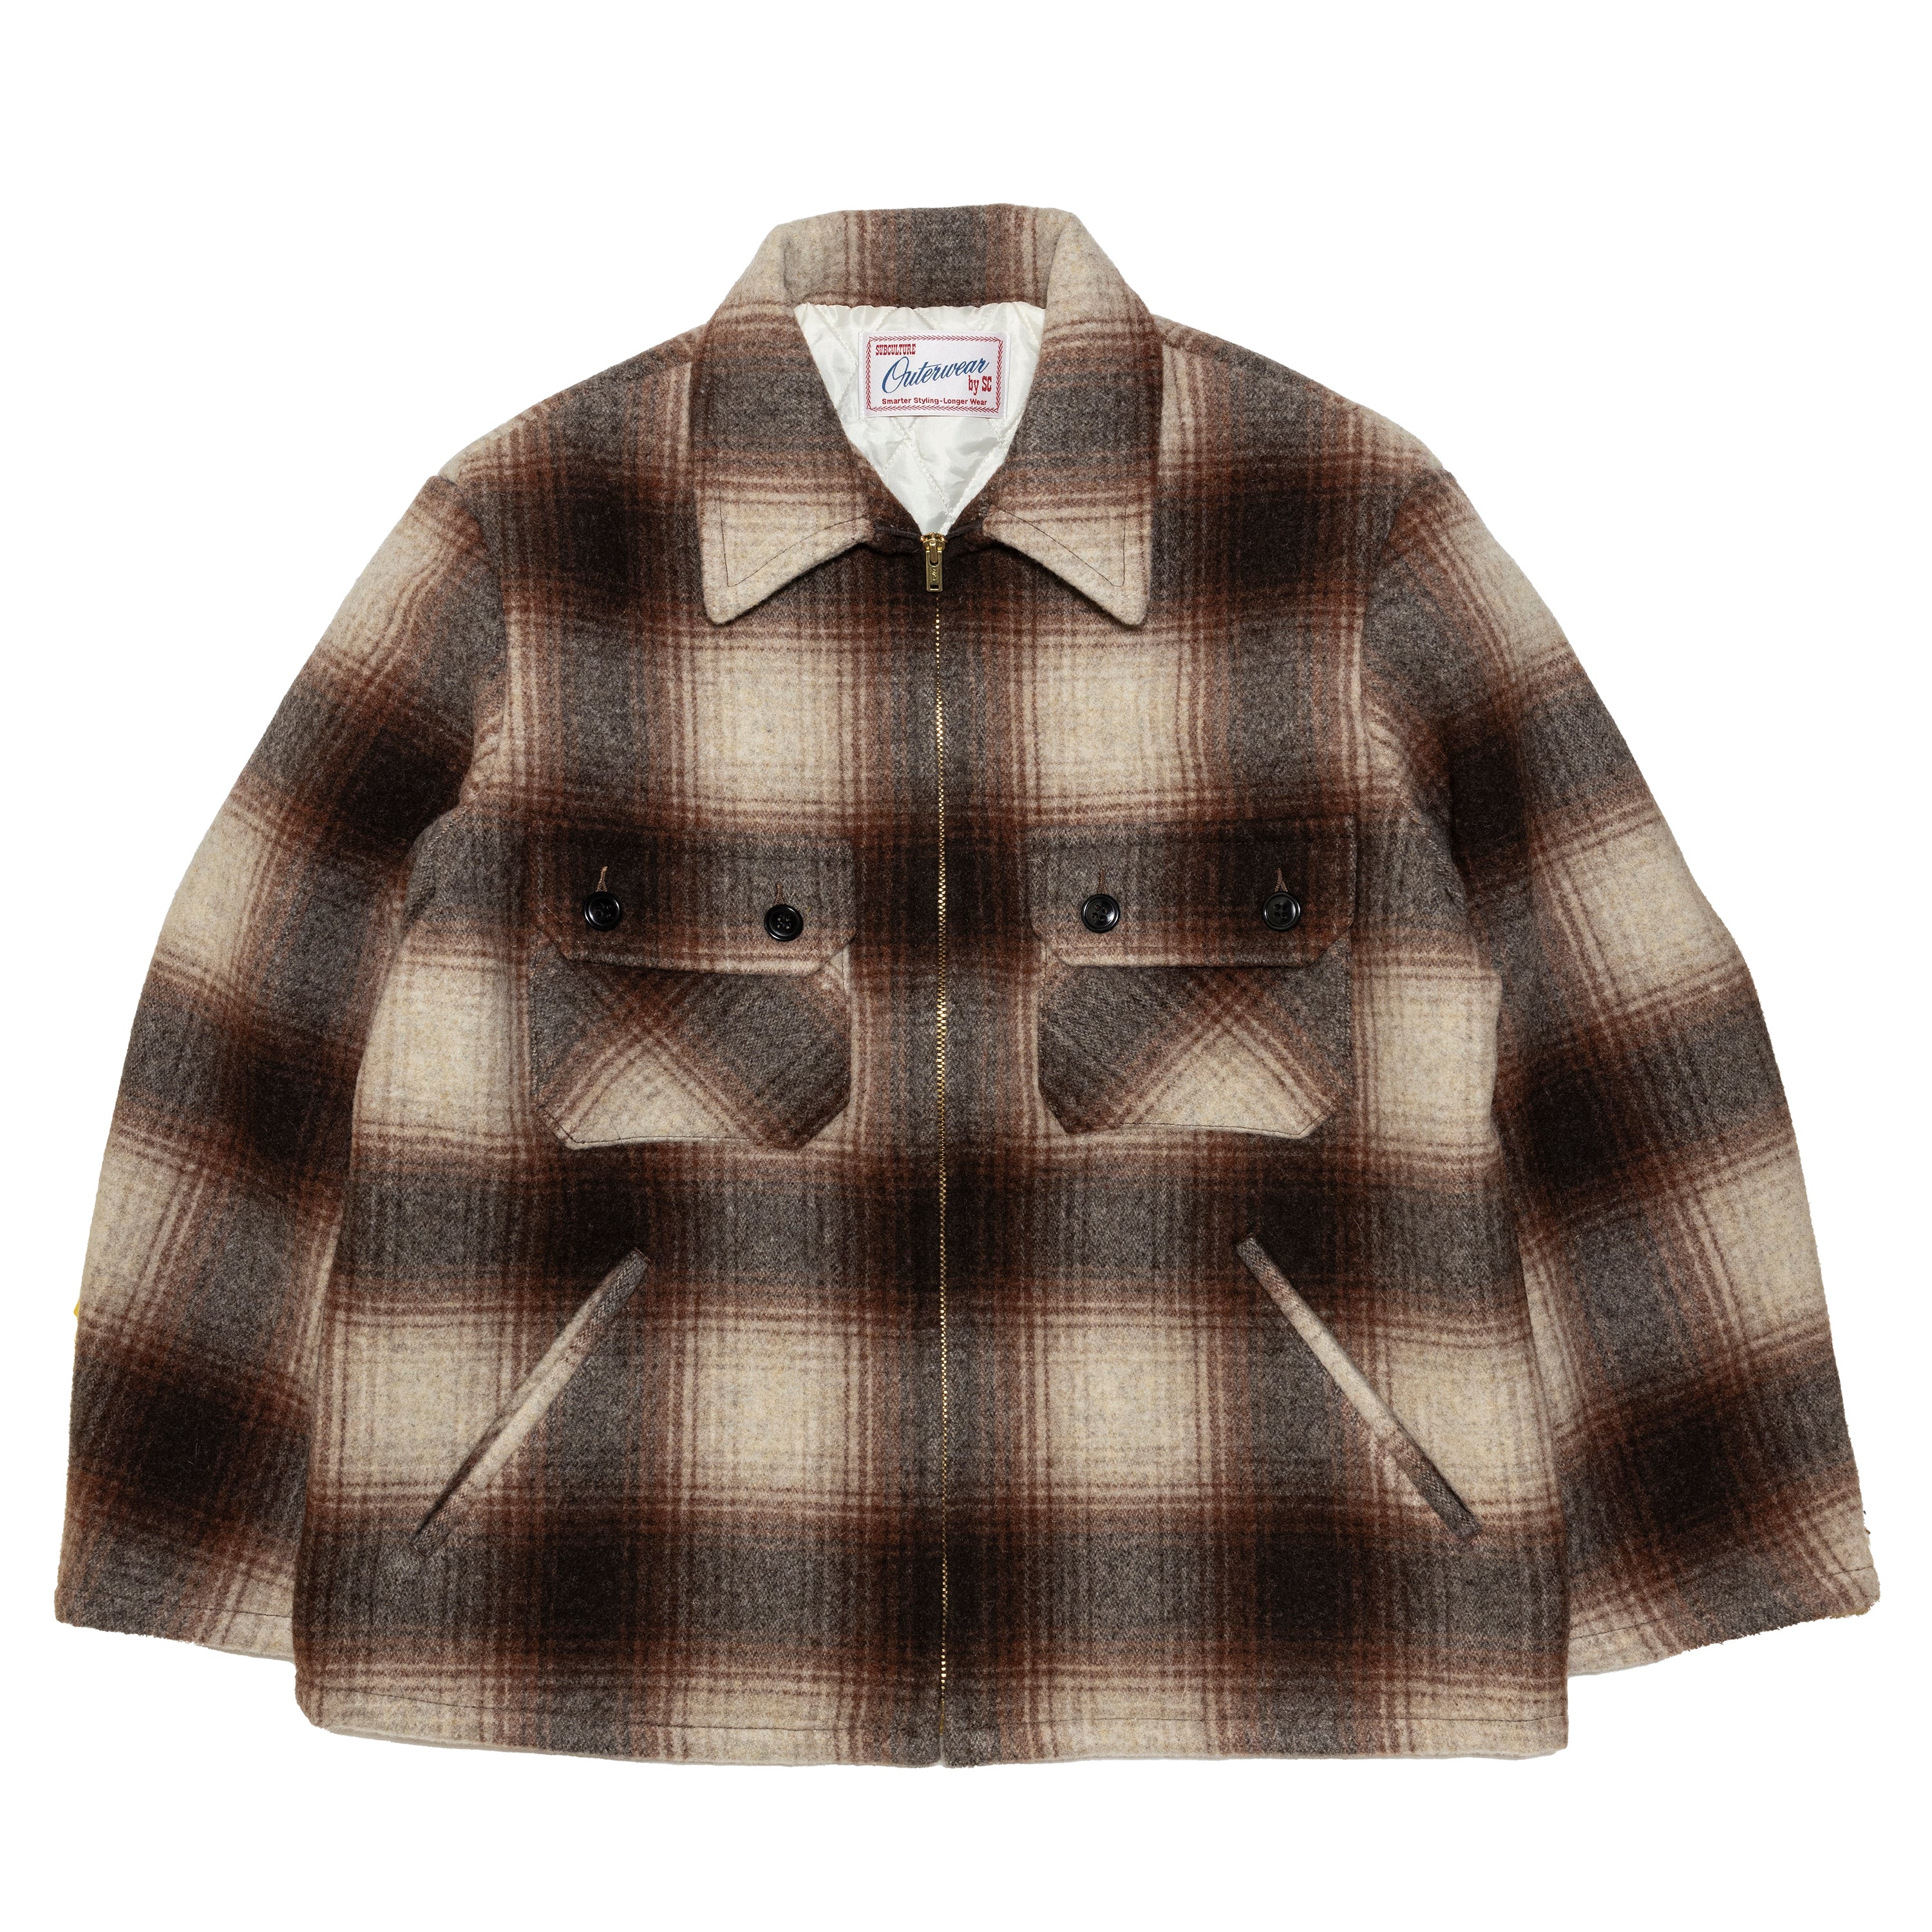 Subculture OMBRE CHECK WOOLJACKET 1 S - ジャケット・アウター